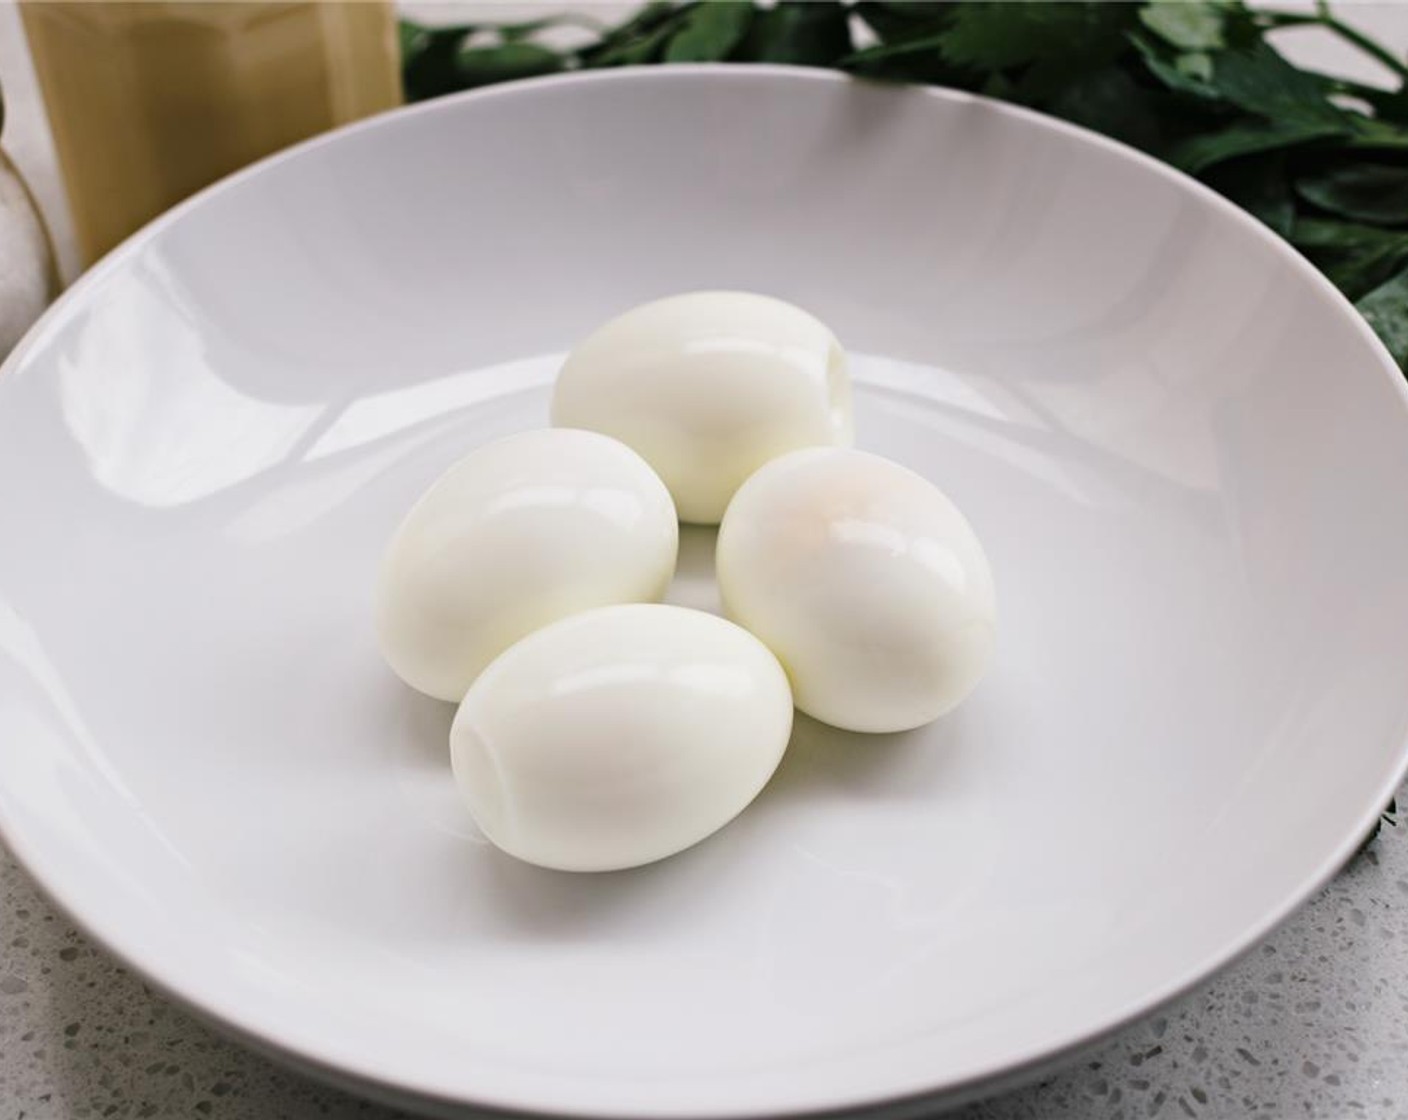 step 2 Turn off the heat, cover, and let sit for 8 to 10 minutes. Drain the water, cool the eggs in ice water and peel.